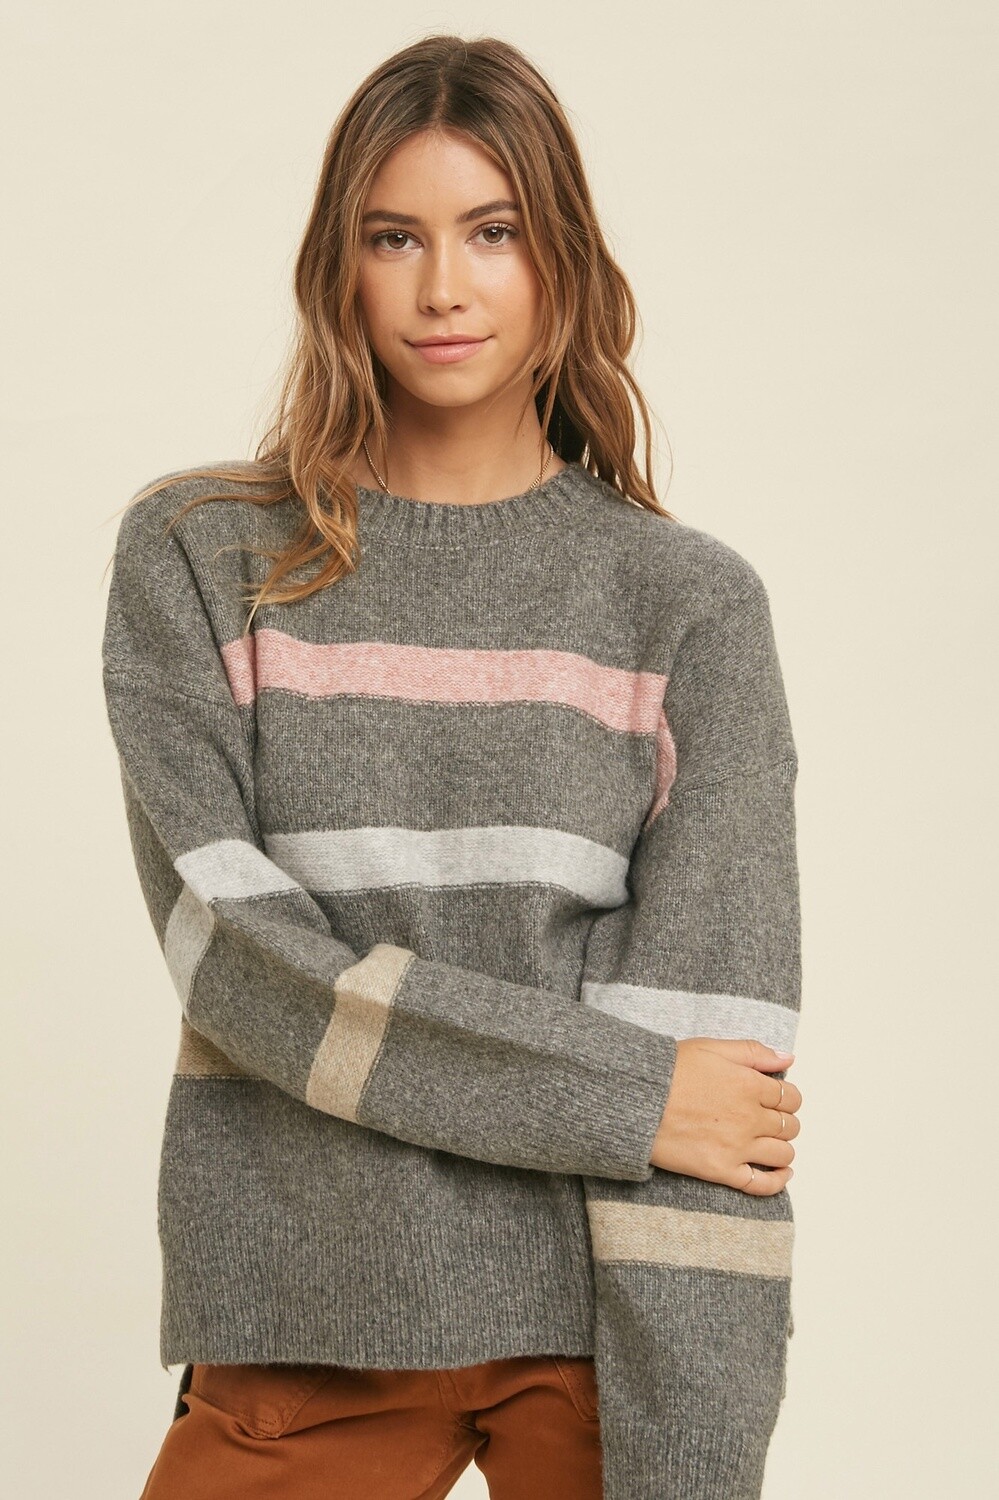 Brushed Multicolor Striped Sweater in Charcoal, Size: S/M